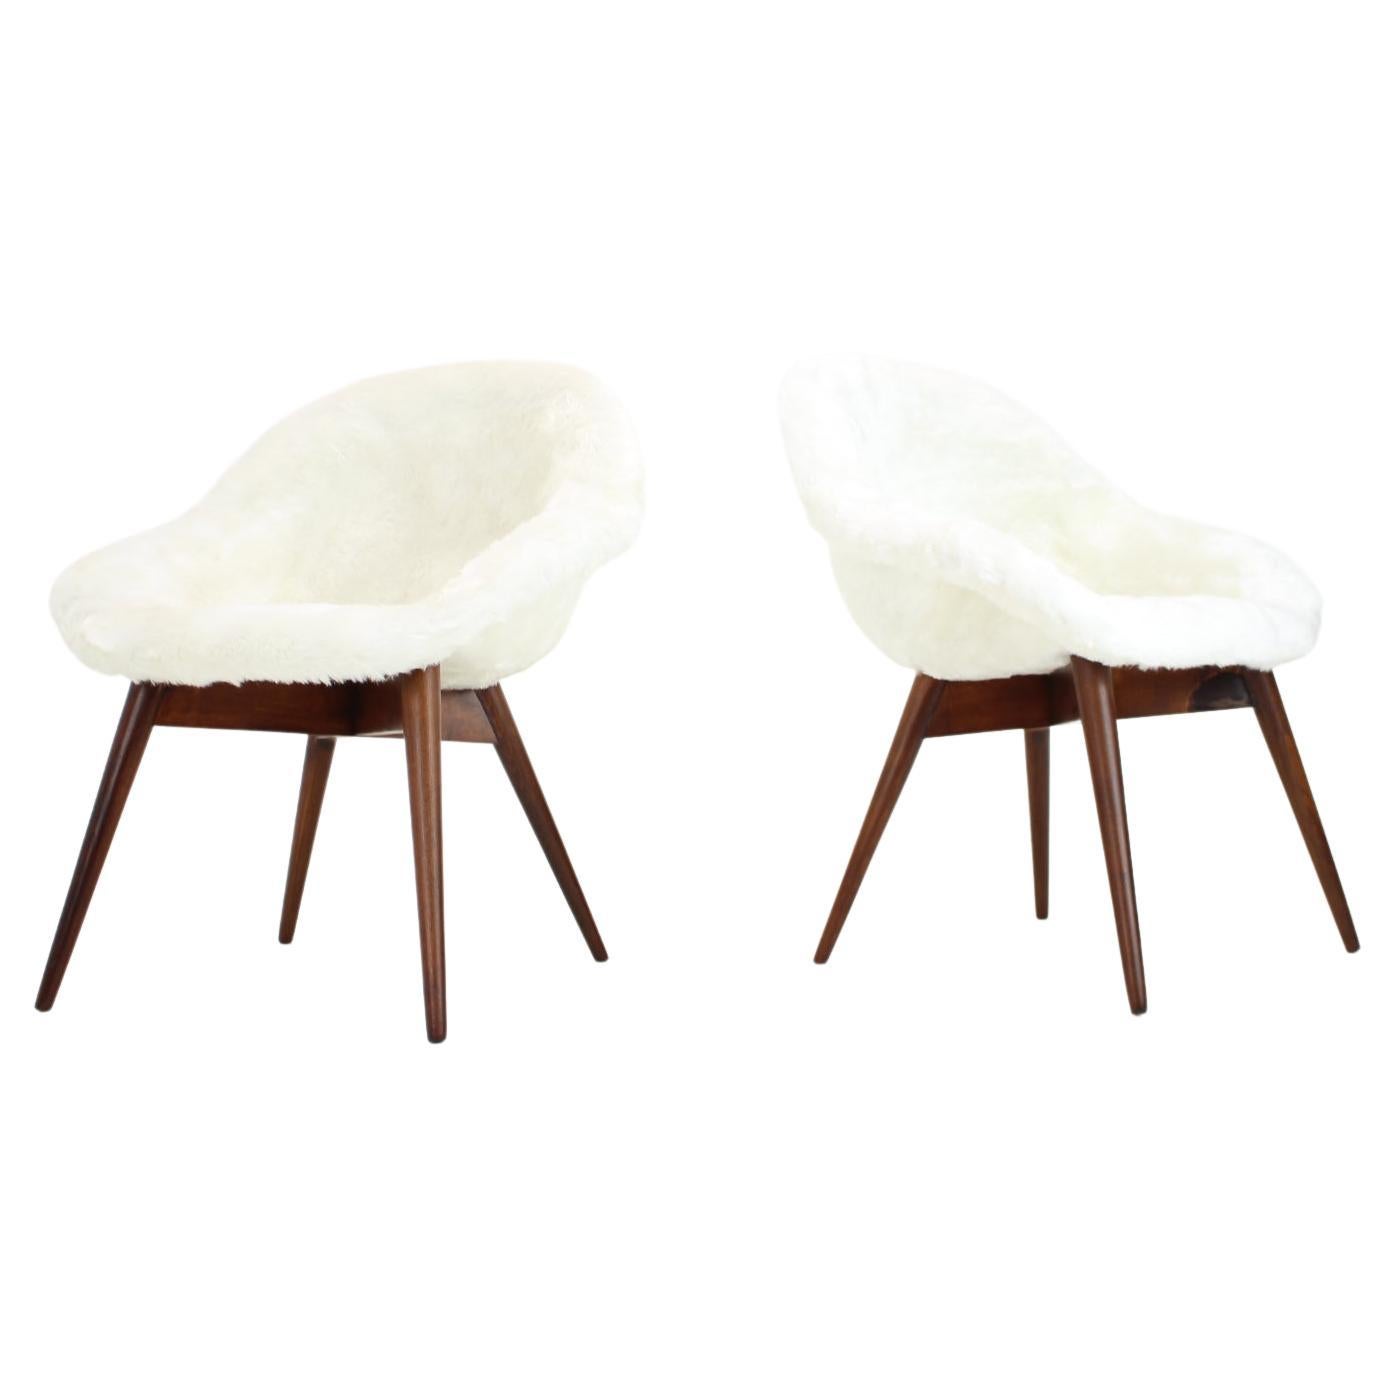 Pair of Restored Lounge Chairs by Miroslav Navratil, 1960s For Sale